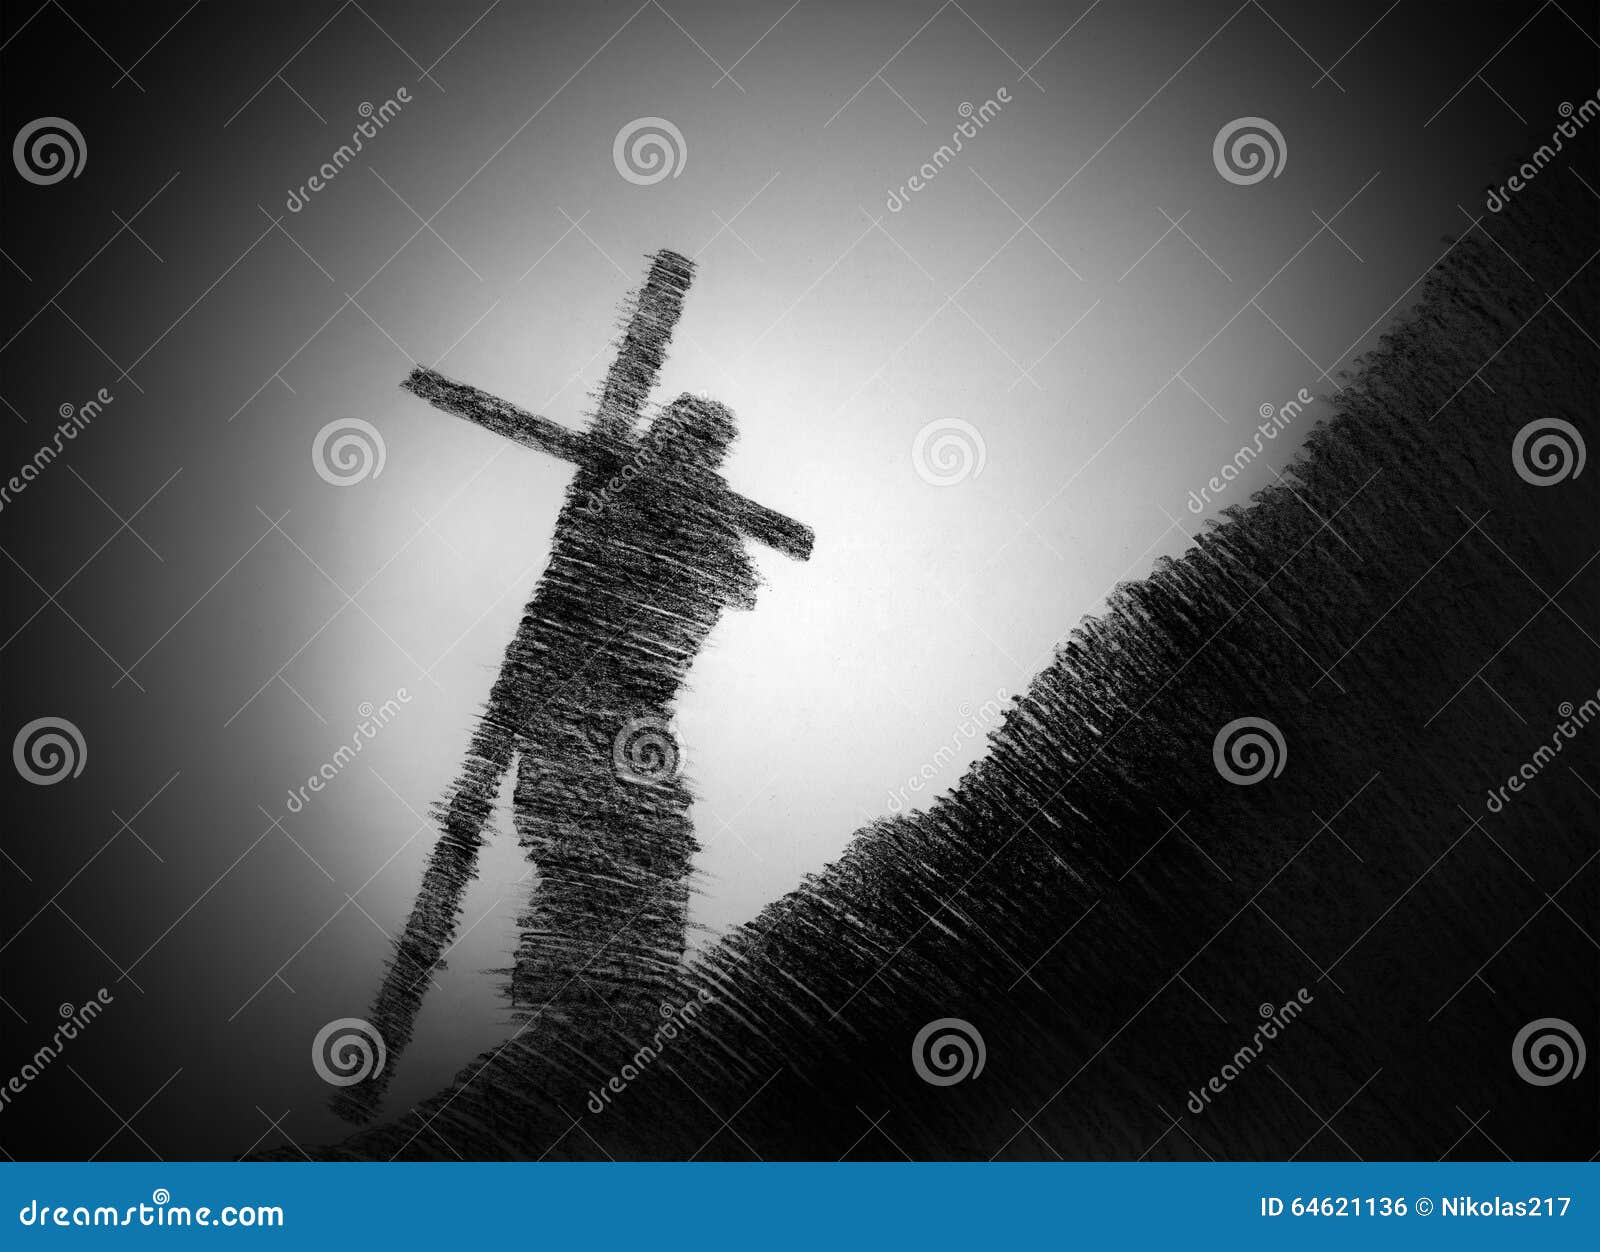 man carrying the cross